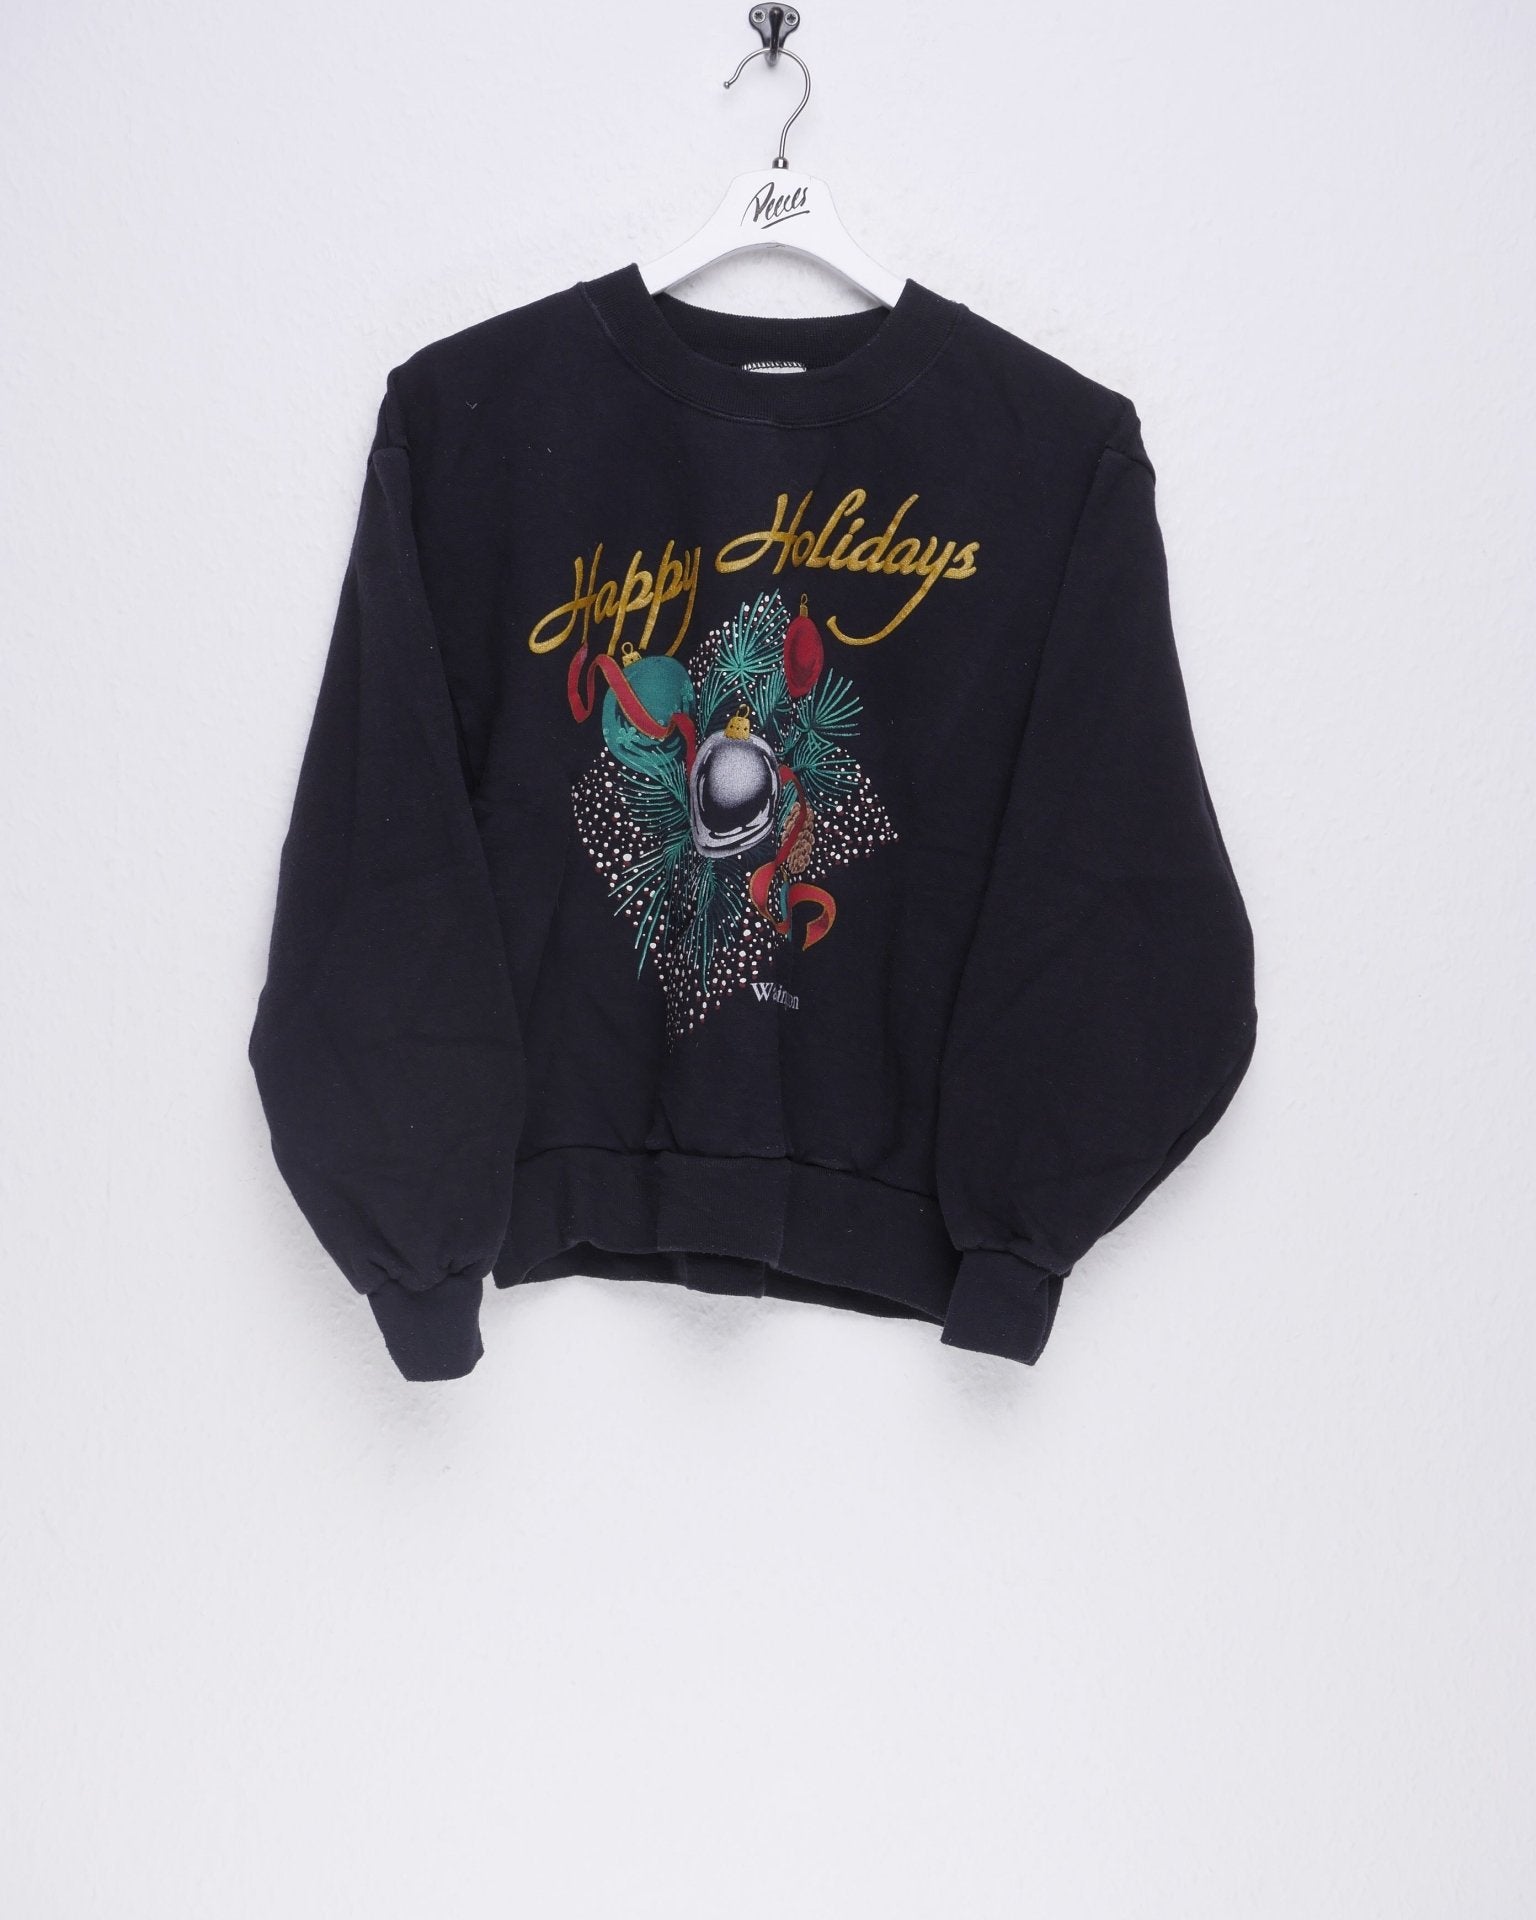 Happy Holidays printed Graphic Vintage Sweater - Peeces